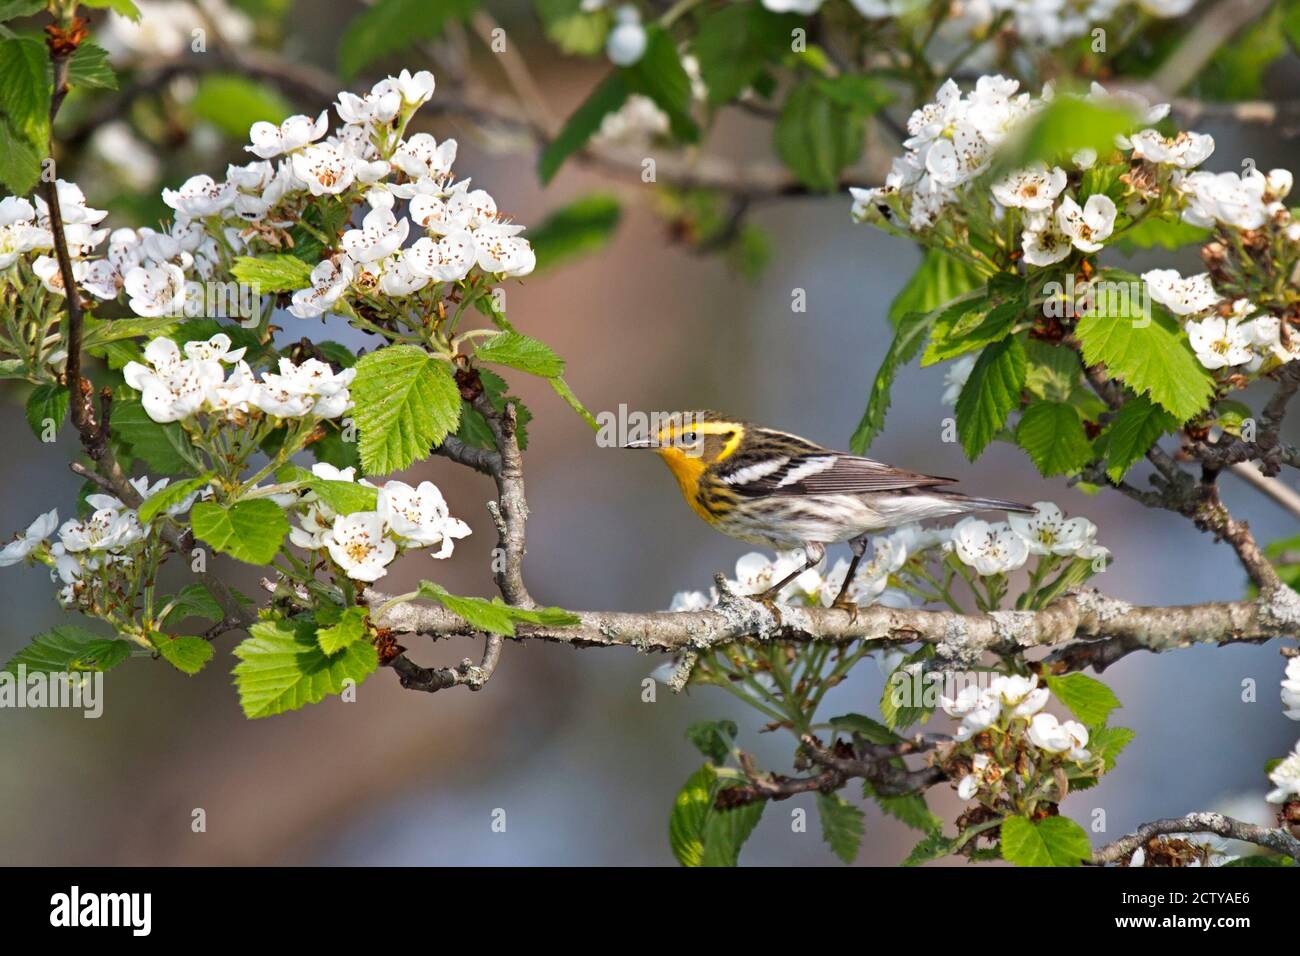 A blackburnian warbler looks over an apple blossom. Bright yellow with black stripes the warbler stands out on from the green leaves and white blossom Stock Photo